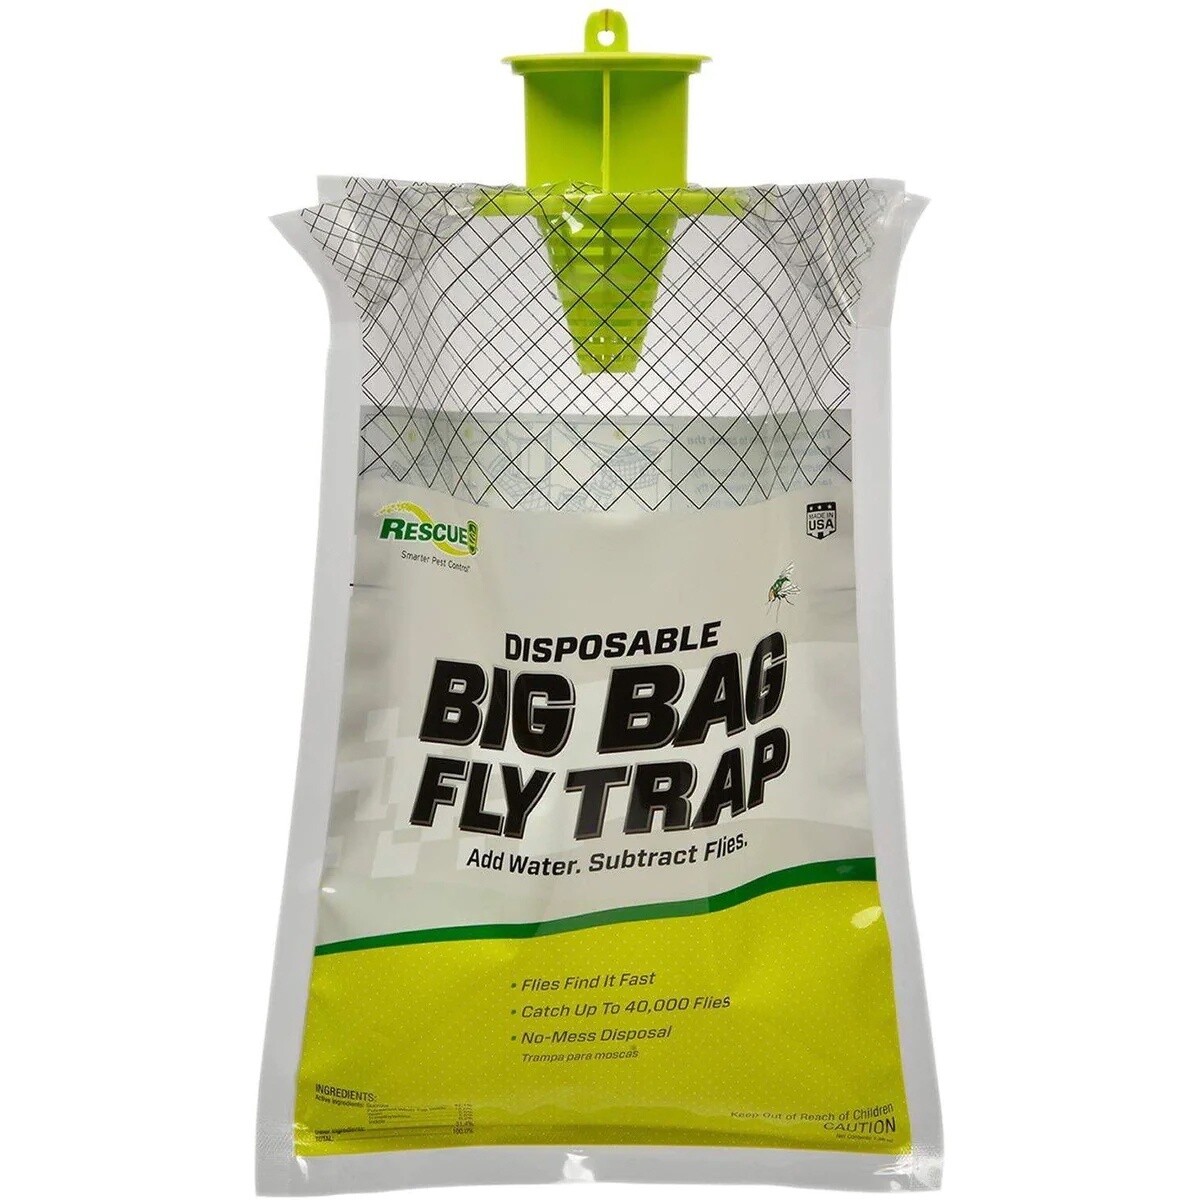 Rescue Disposable Big Bag Fly Trap